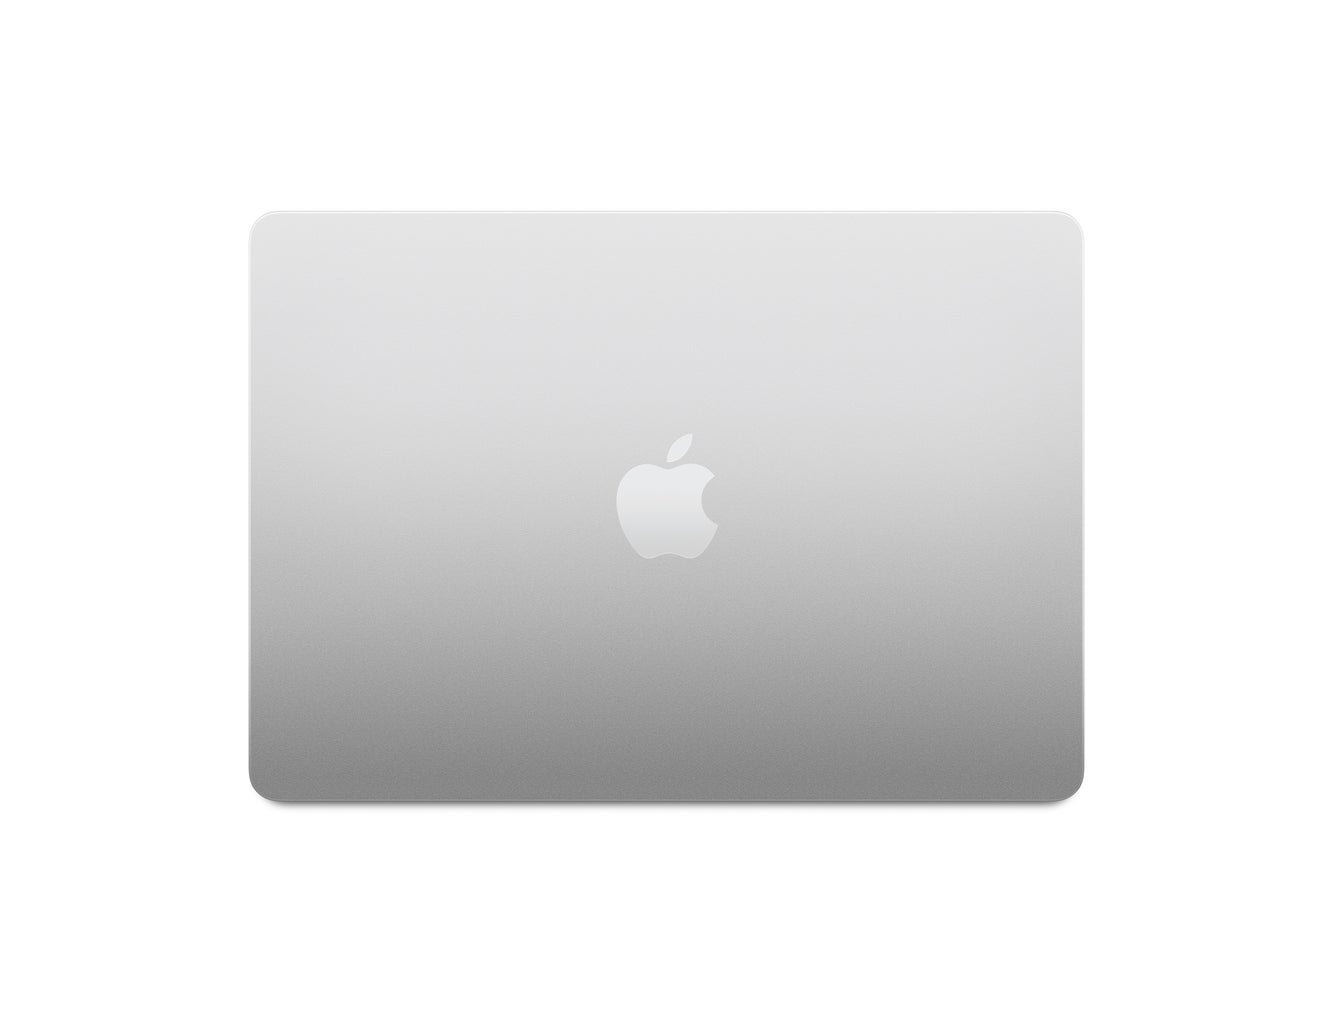 macbook air silver gallery6 20220606?width=1024&height=1024&fit=cover&auto=webp